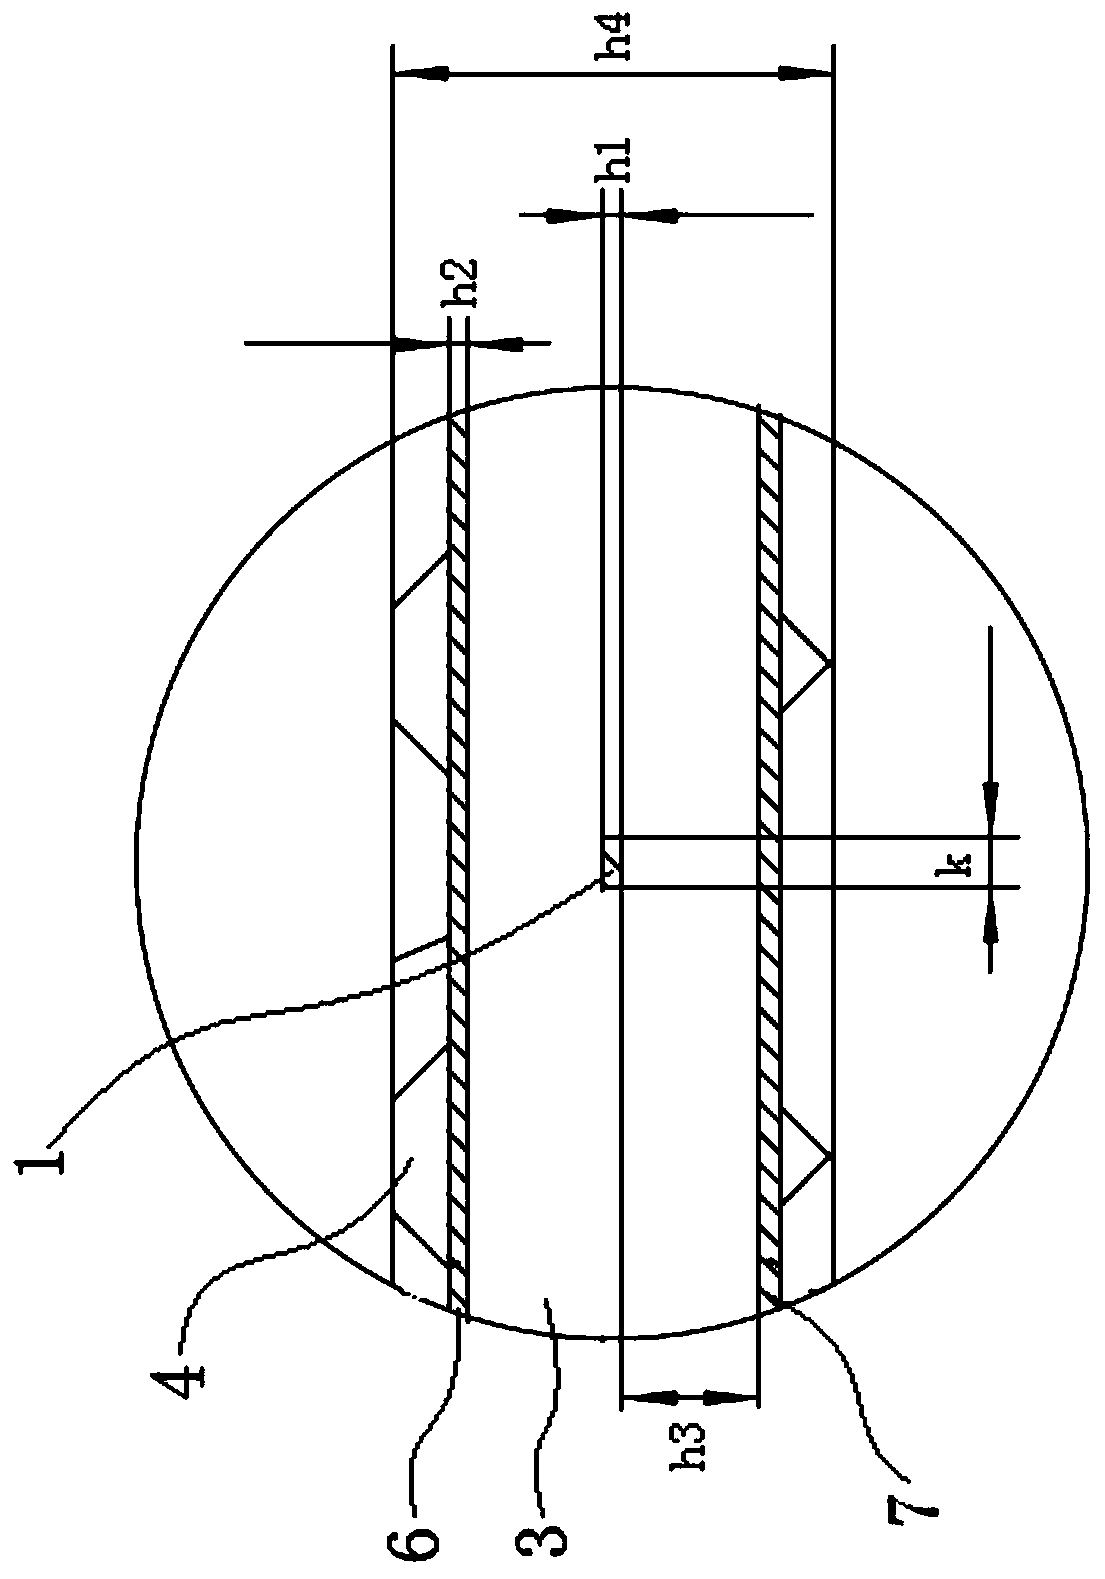 Flexible strip-shaped cable and radio frequency assembly